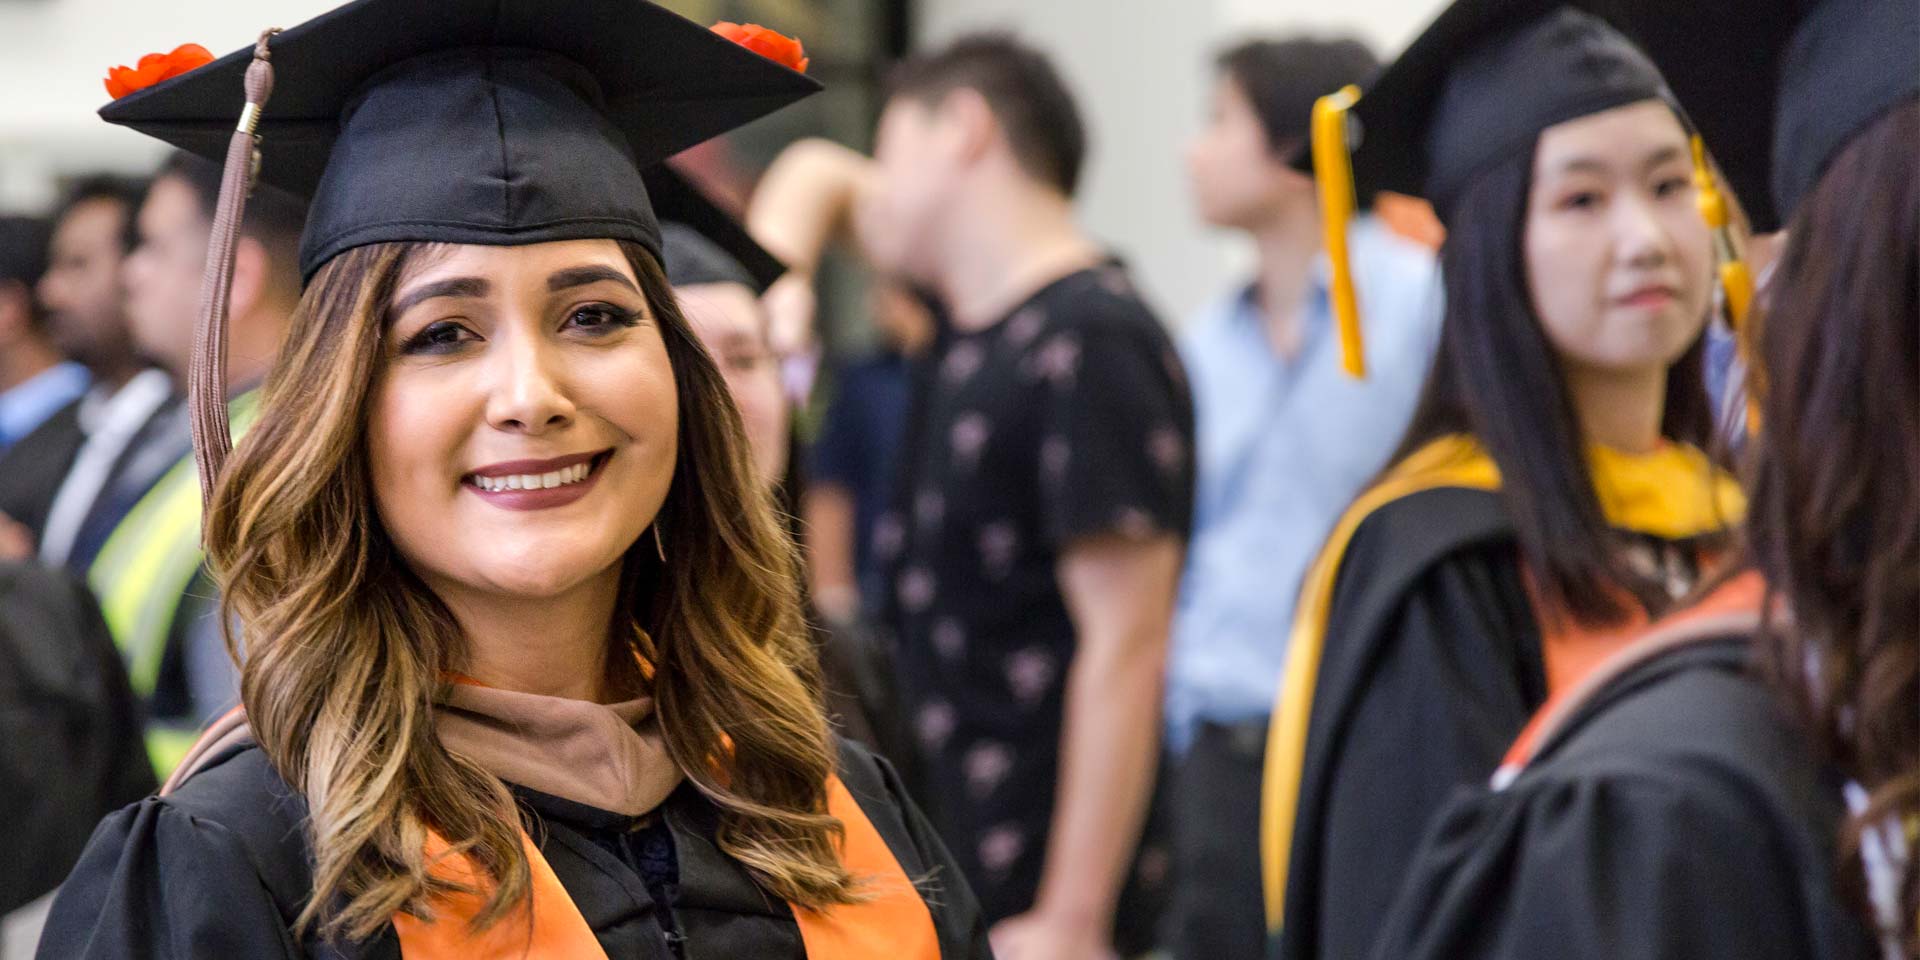 Jindal School master's in healthcare leadership and management graduate on UT Dallas commencement day